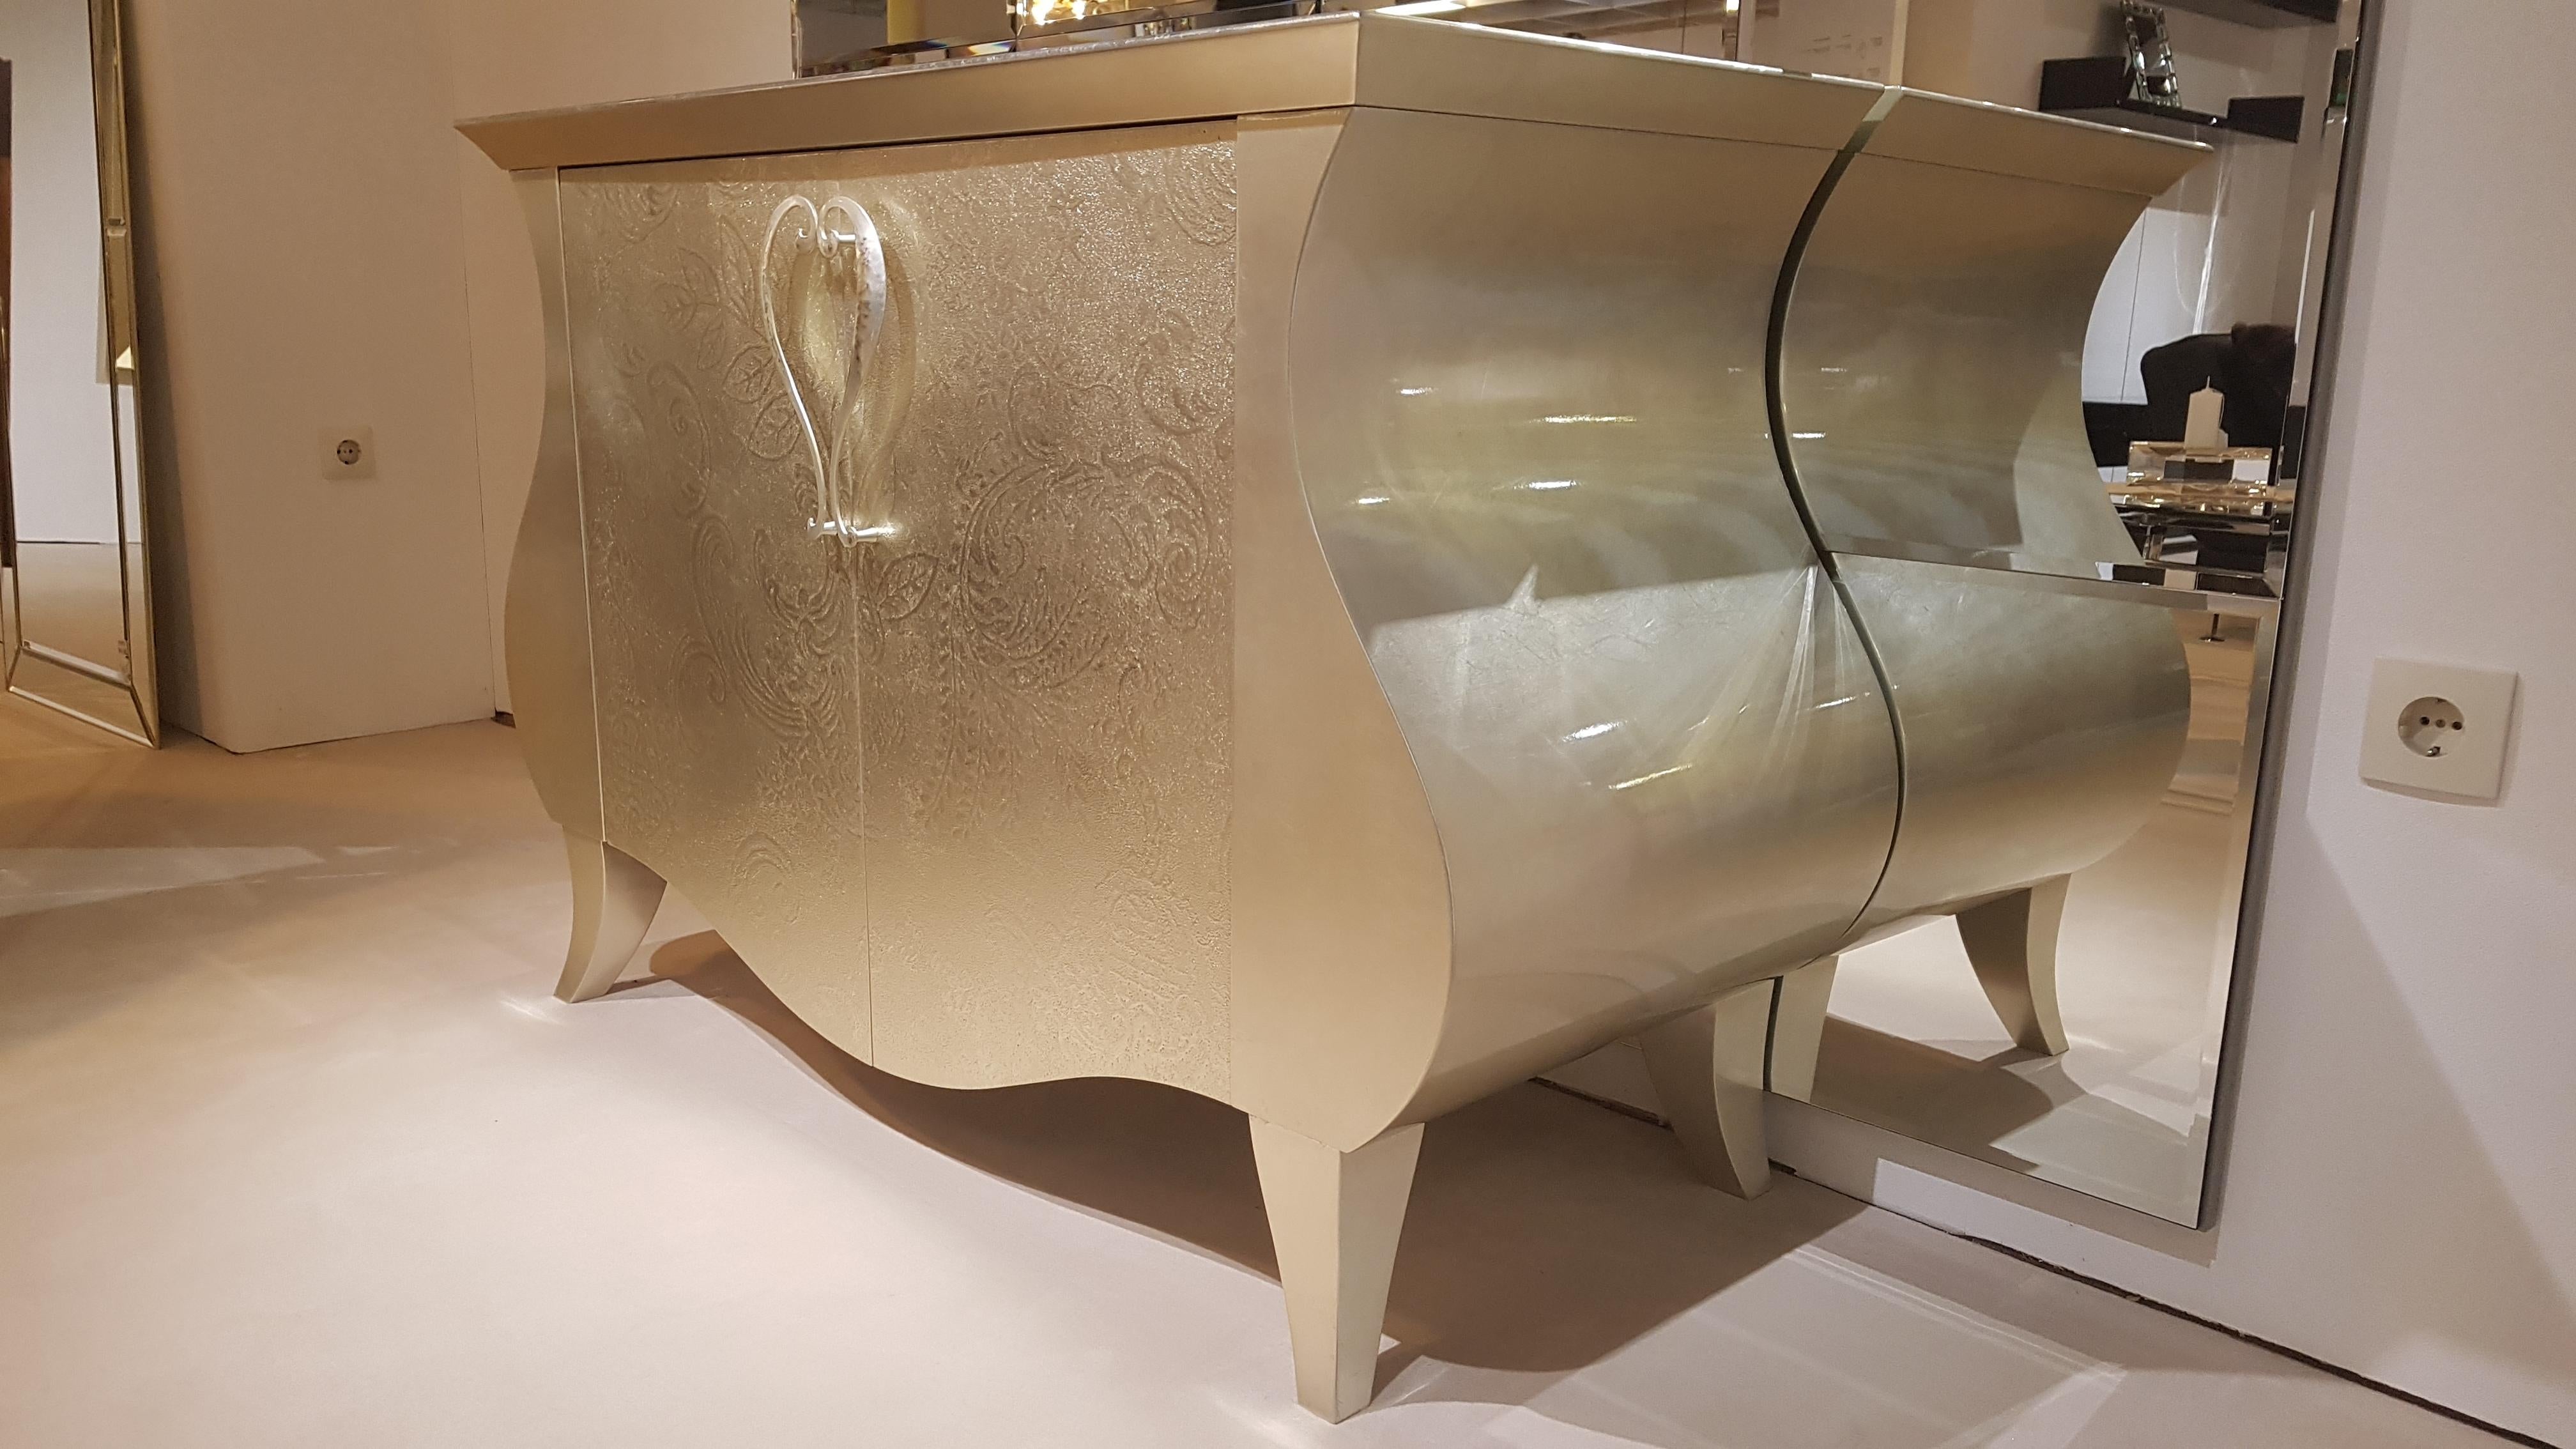 Stunning curved commode with a beautiful design and a luxurious all around gold leaf finish with elegant floral ornamentations. The gold leaf convinces with its wonderful color and the high gloss finish. The complete body is curved like on original